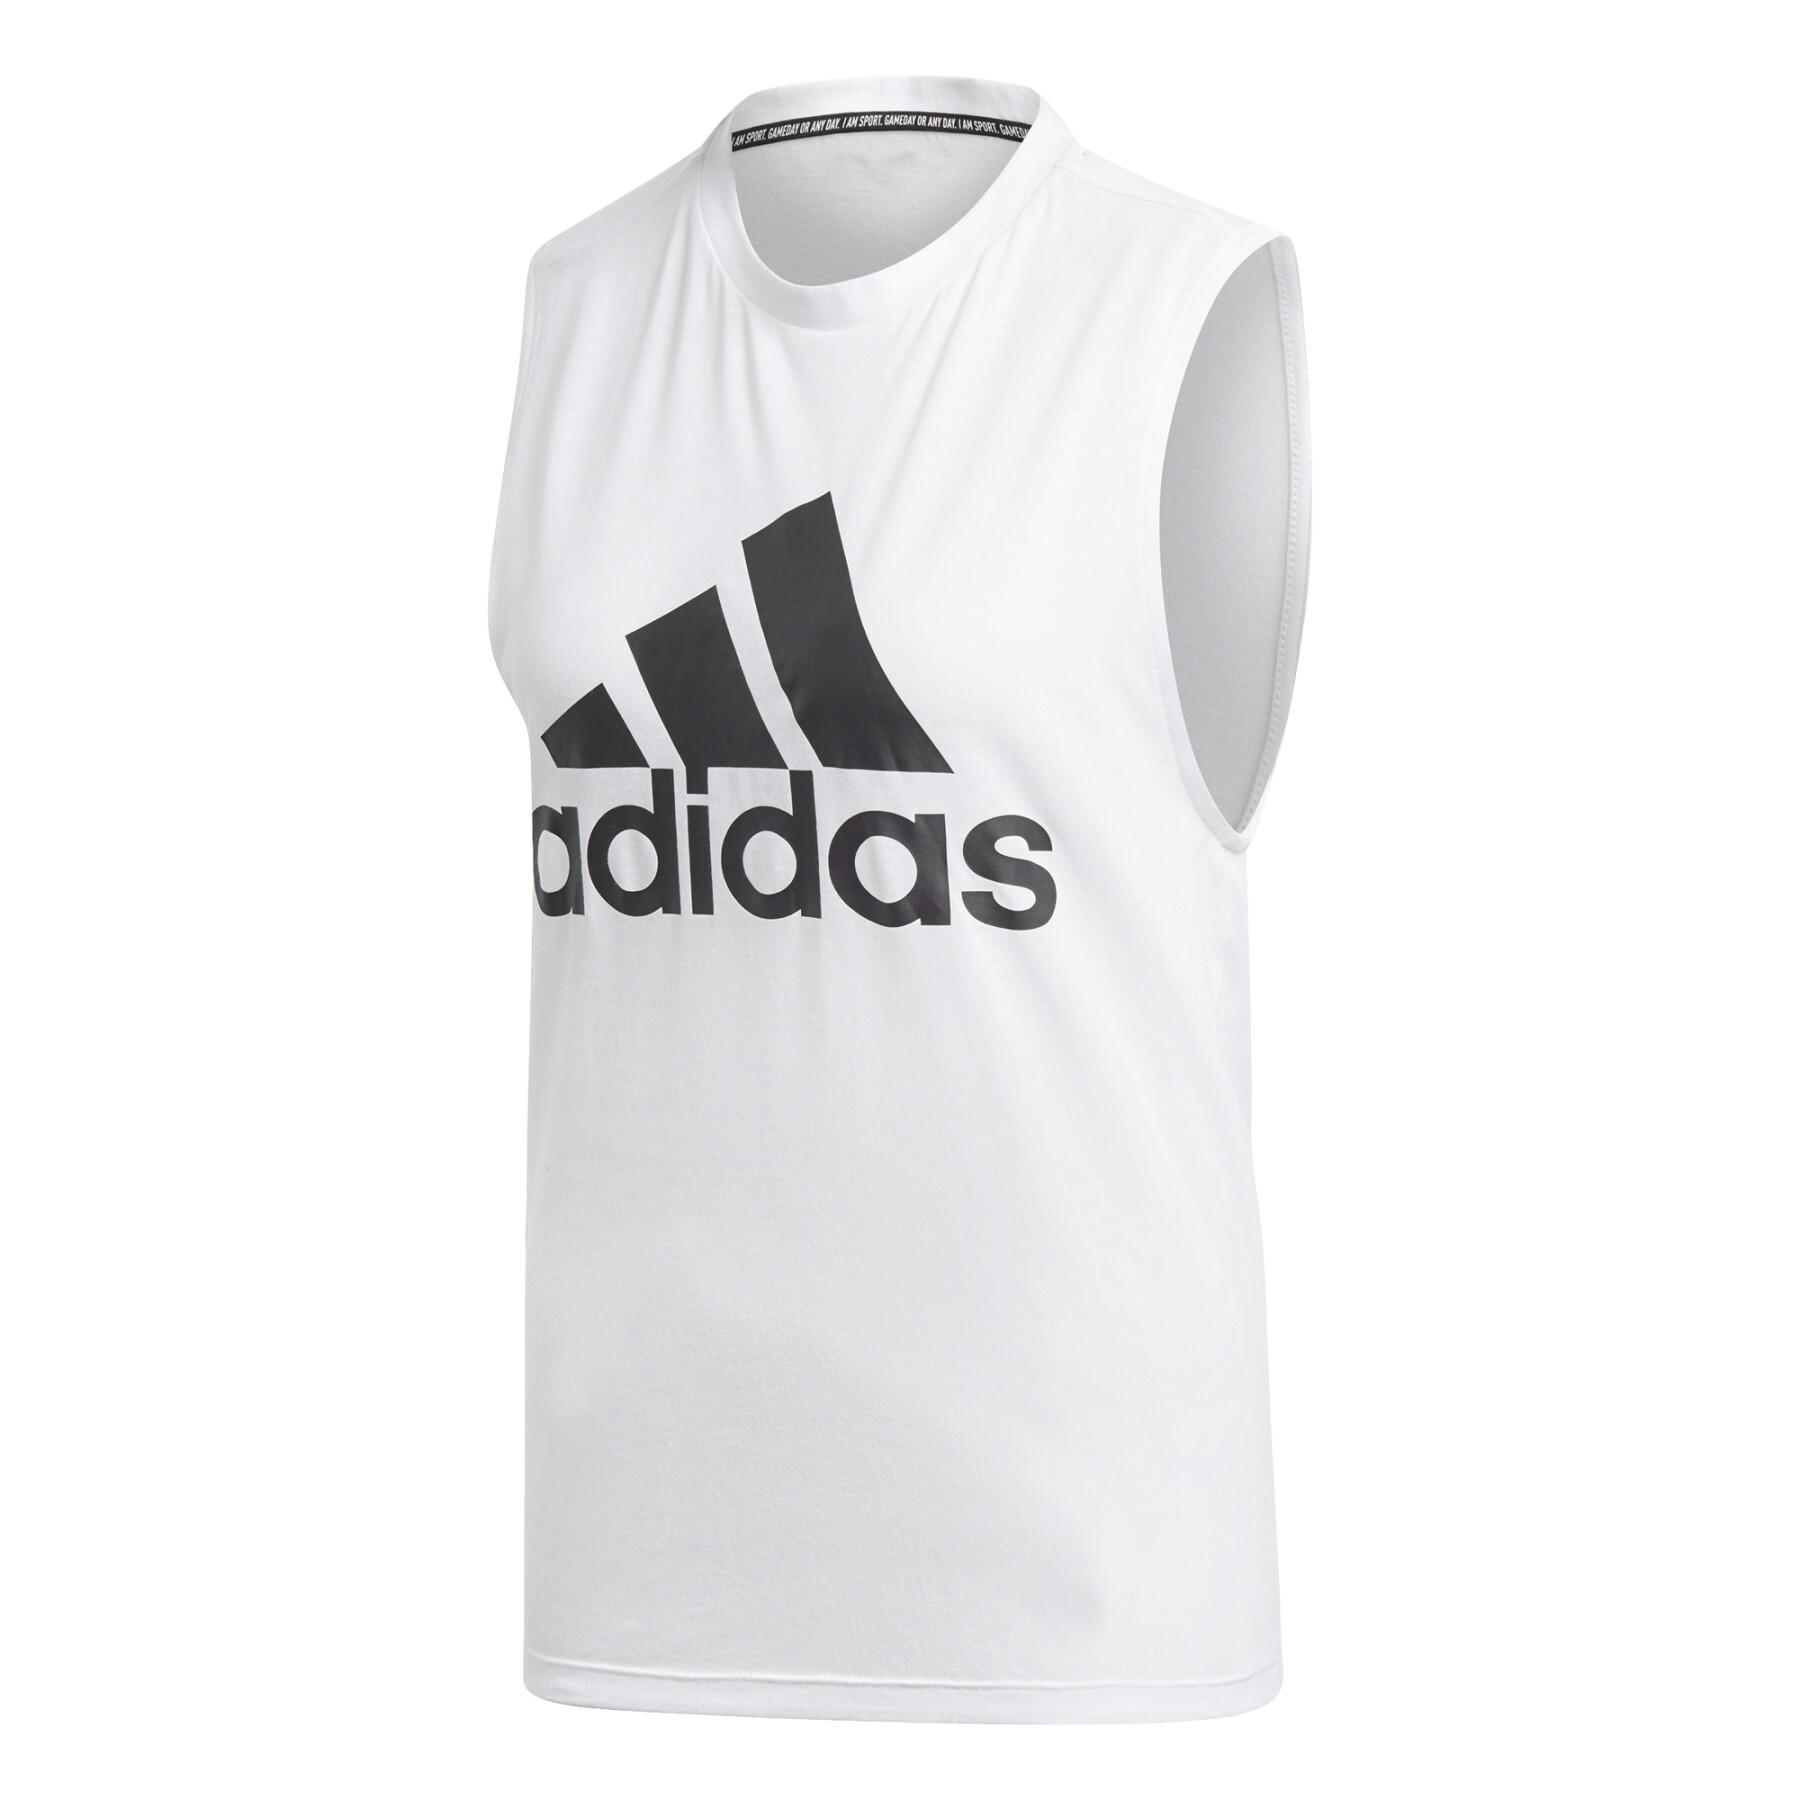 Women's tank top adidas Must Haves Badge of Sport